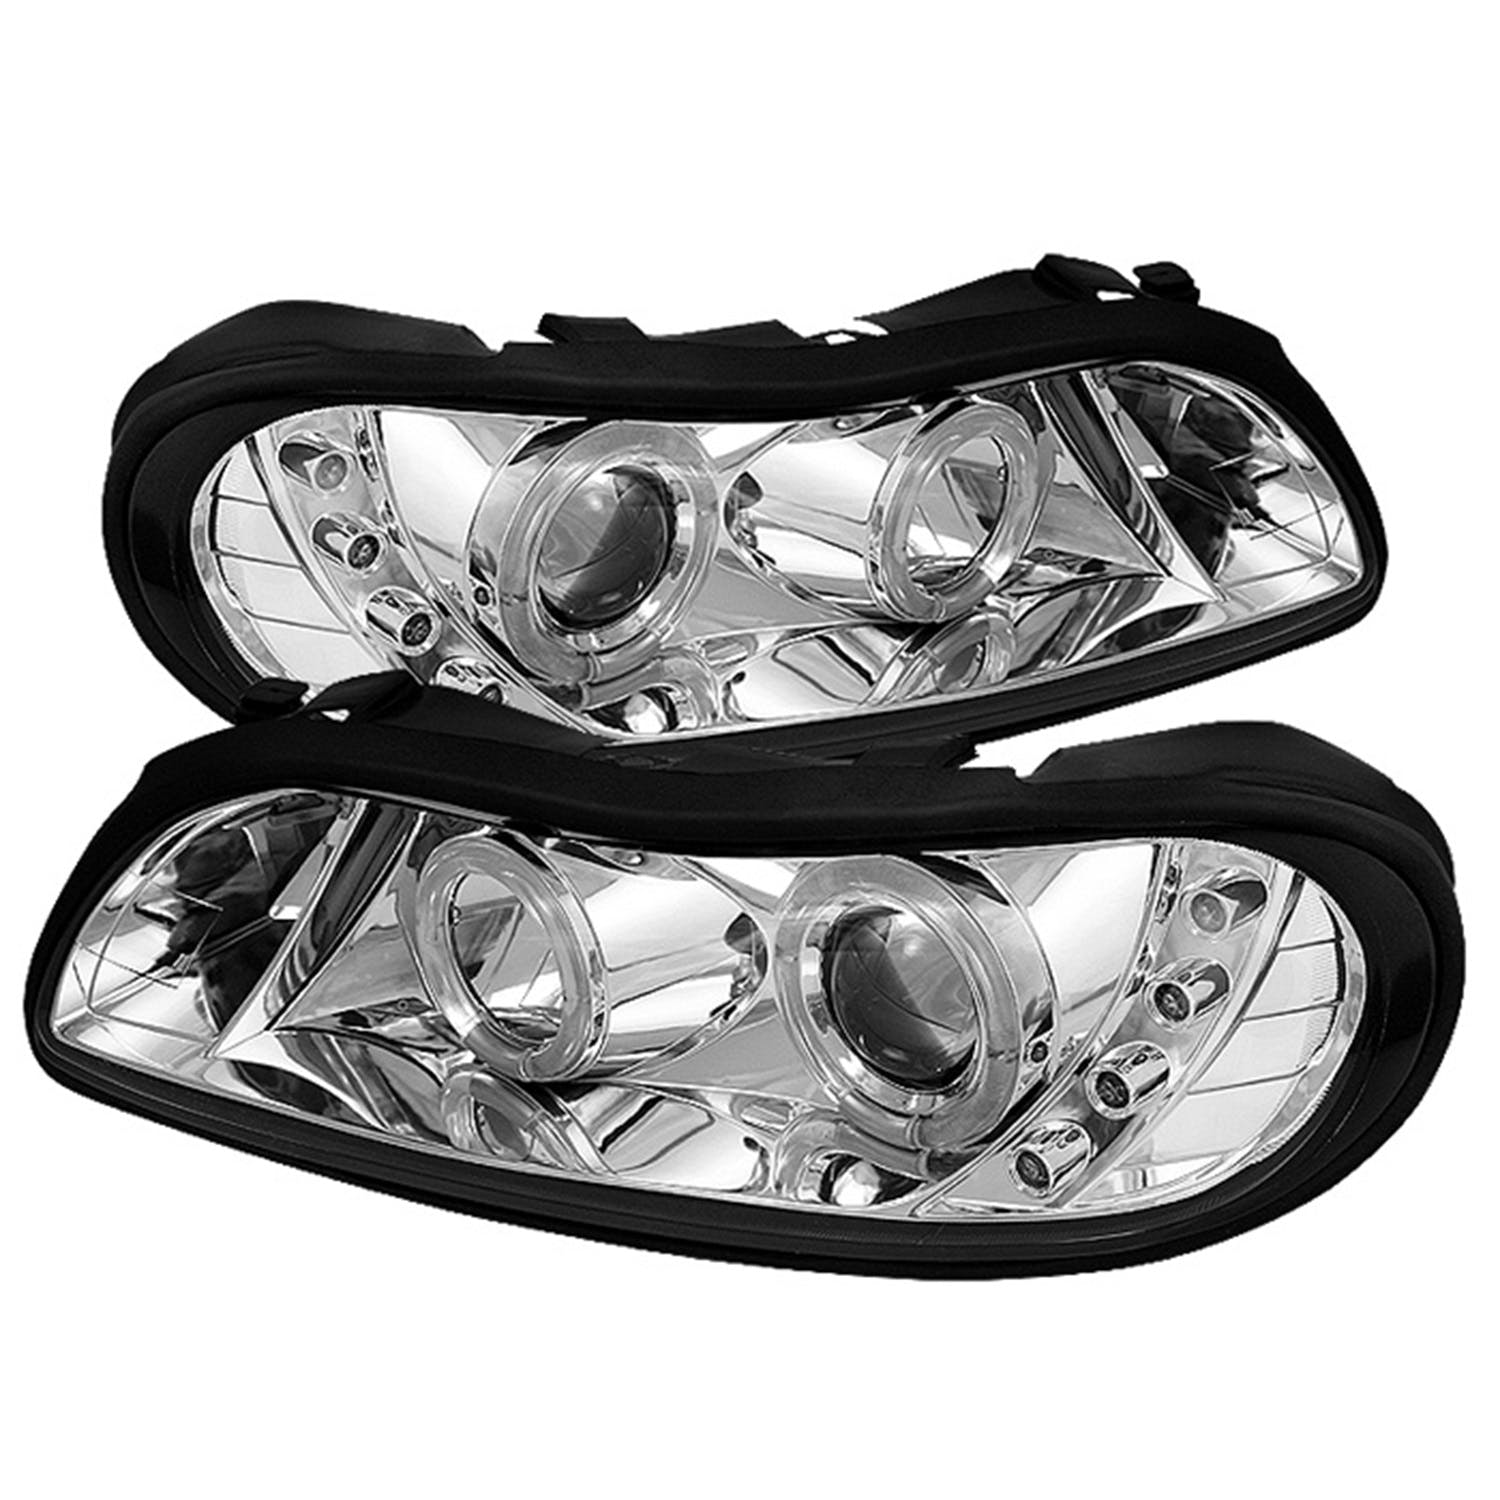 Spyder Auto 5029096 ( SPYDER ) CHEVY MALIBU 97-03 PROJECTOR HEADLIGHTS-LED HALO-LED ( REPLACEABLE LE